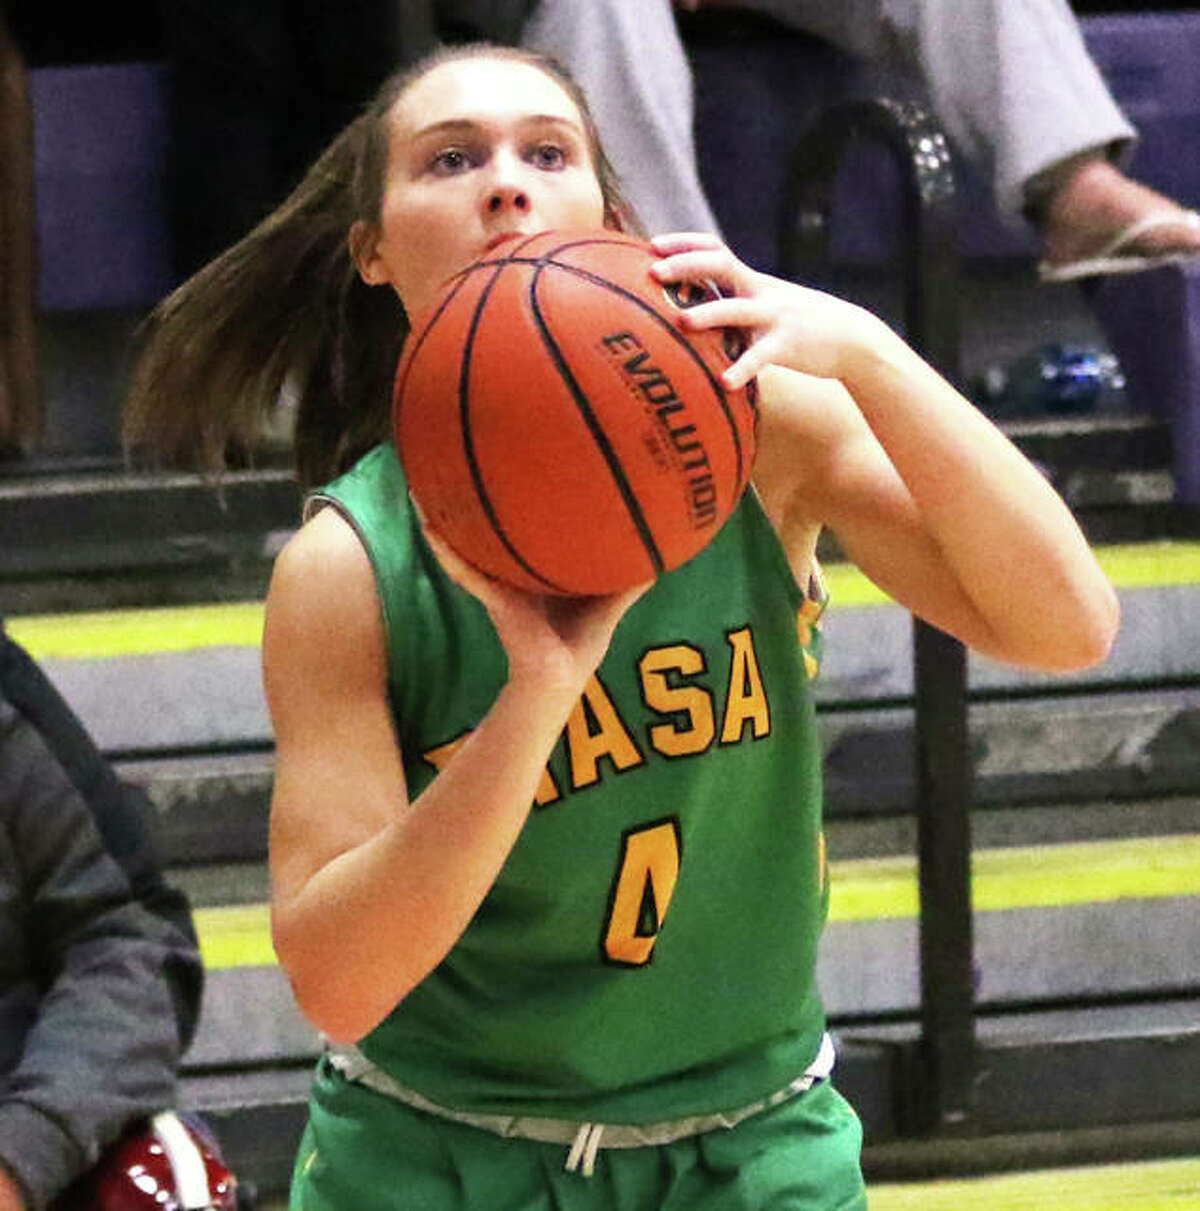 Southwestern’s Josie Bouillon eyes a 3-pointer during Saturday’s game at Litchfield. On Monday, Bouillon made four 3s and scored 14 points in the Piasa Birds win at Wood River.